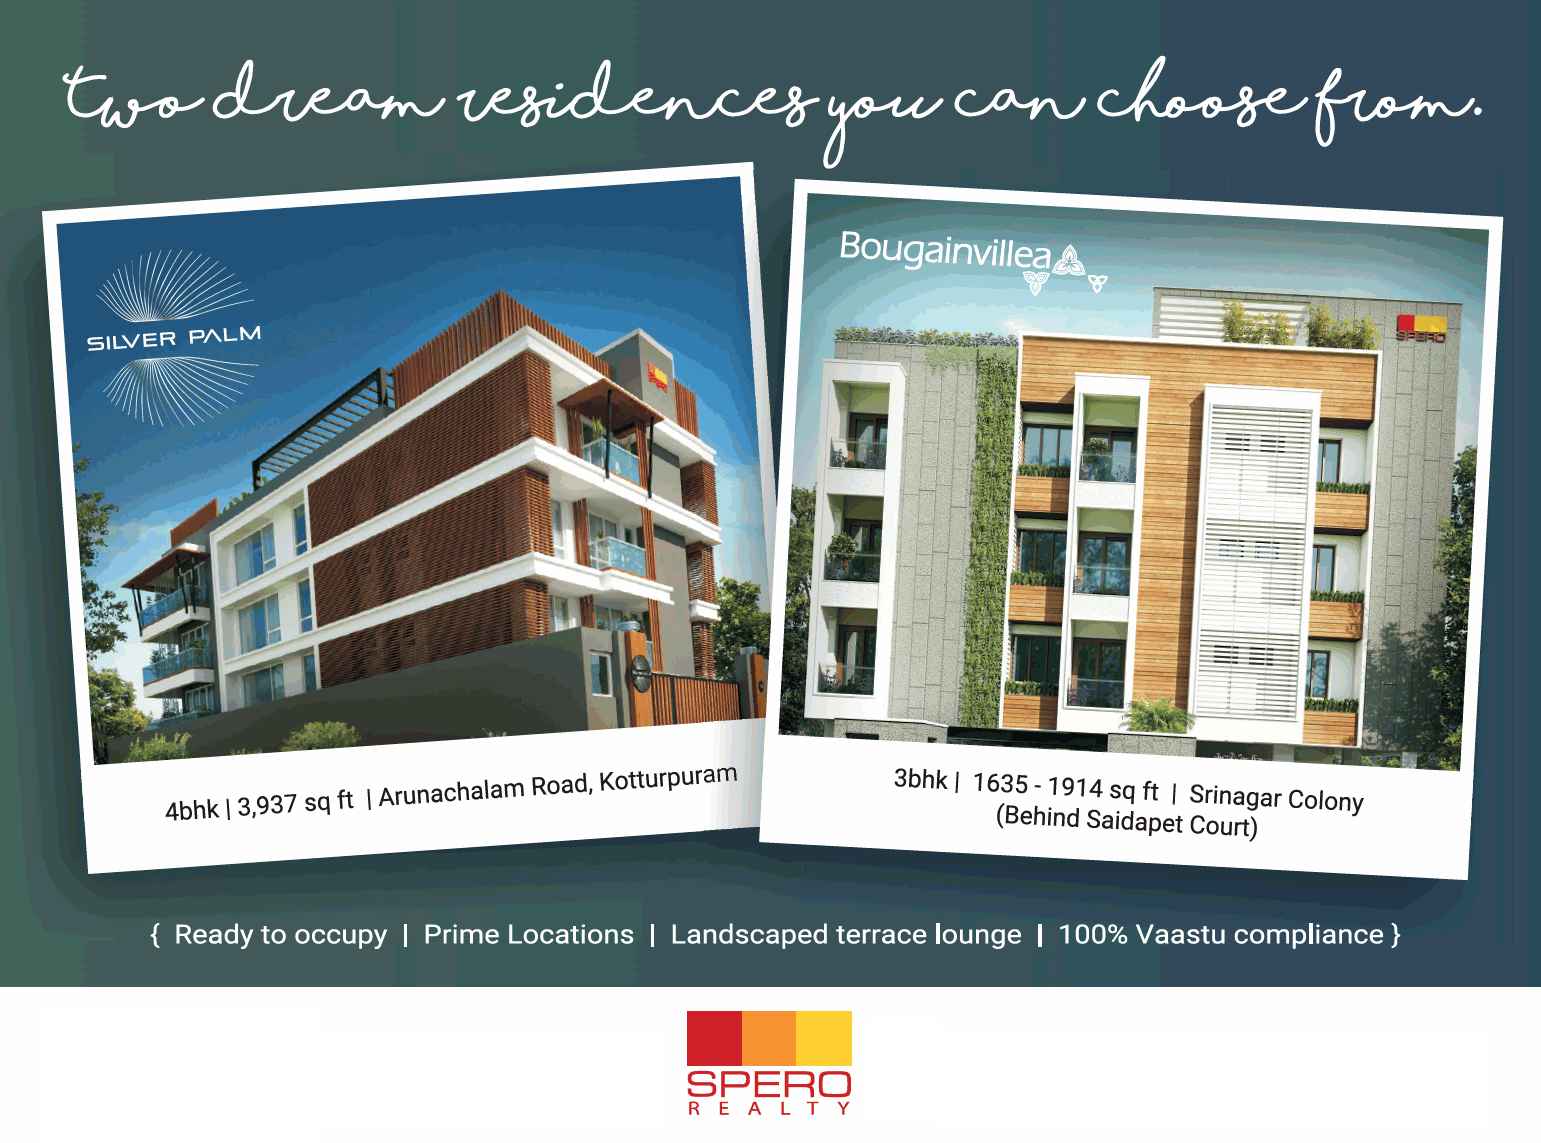 Book projects by Spero Realty in the best neighbourhoods of Chennai